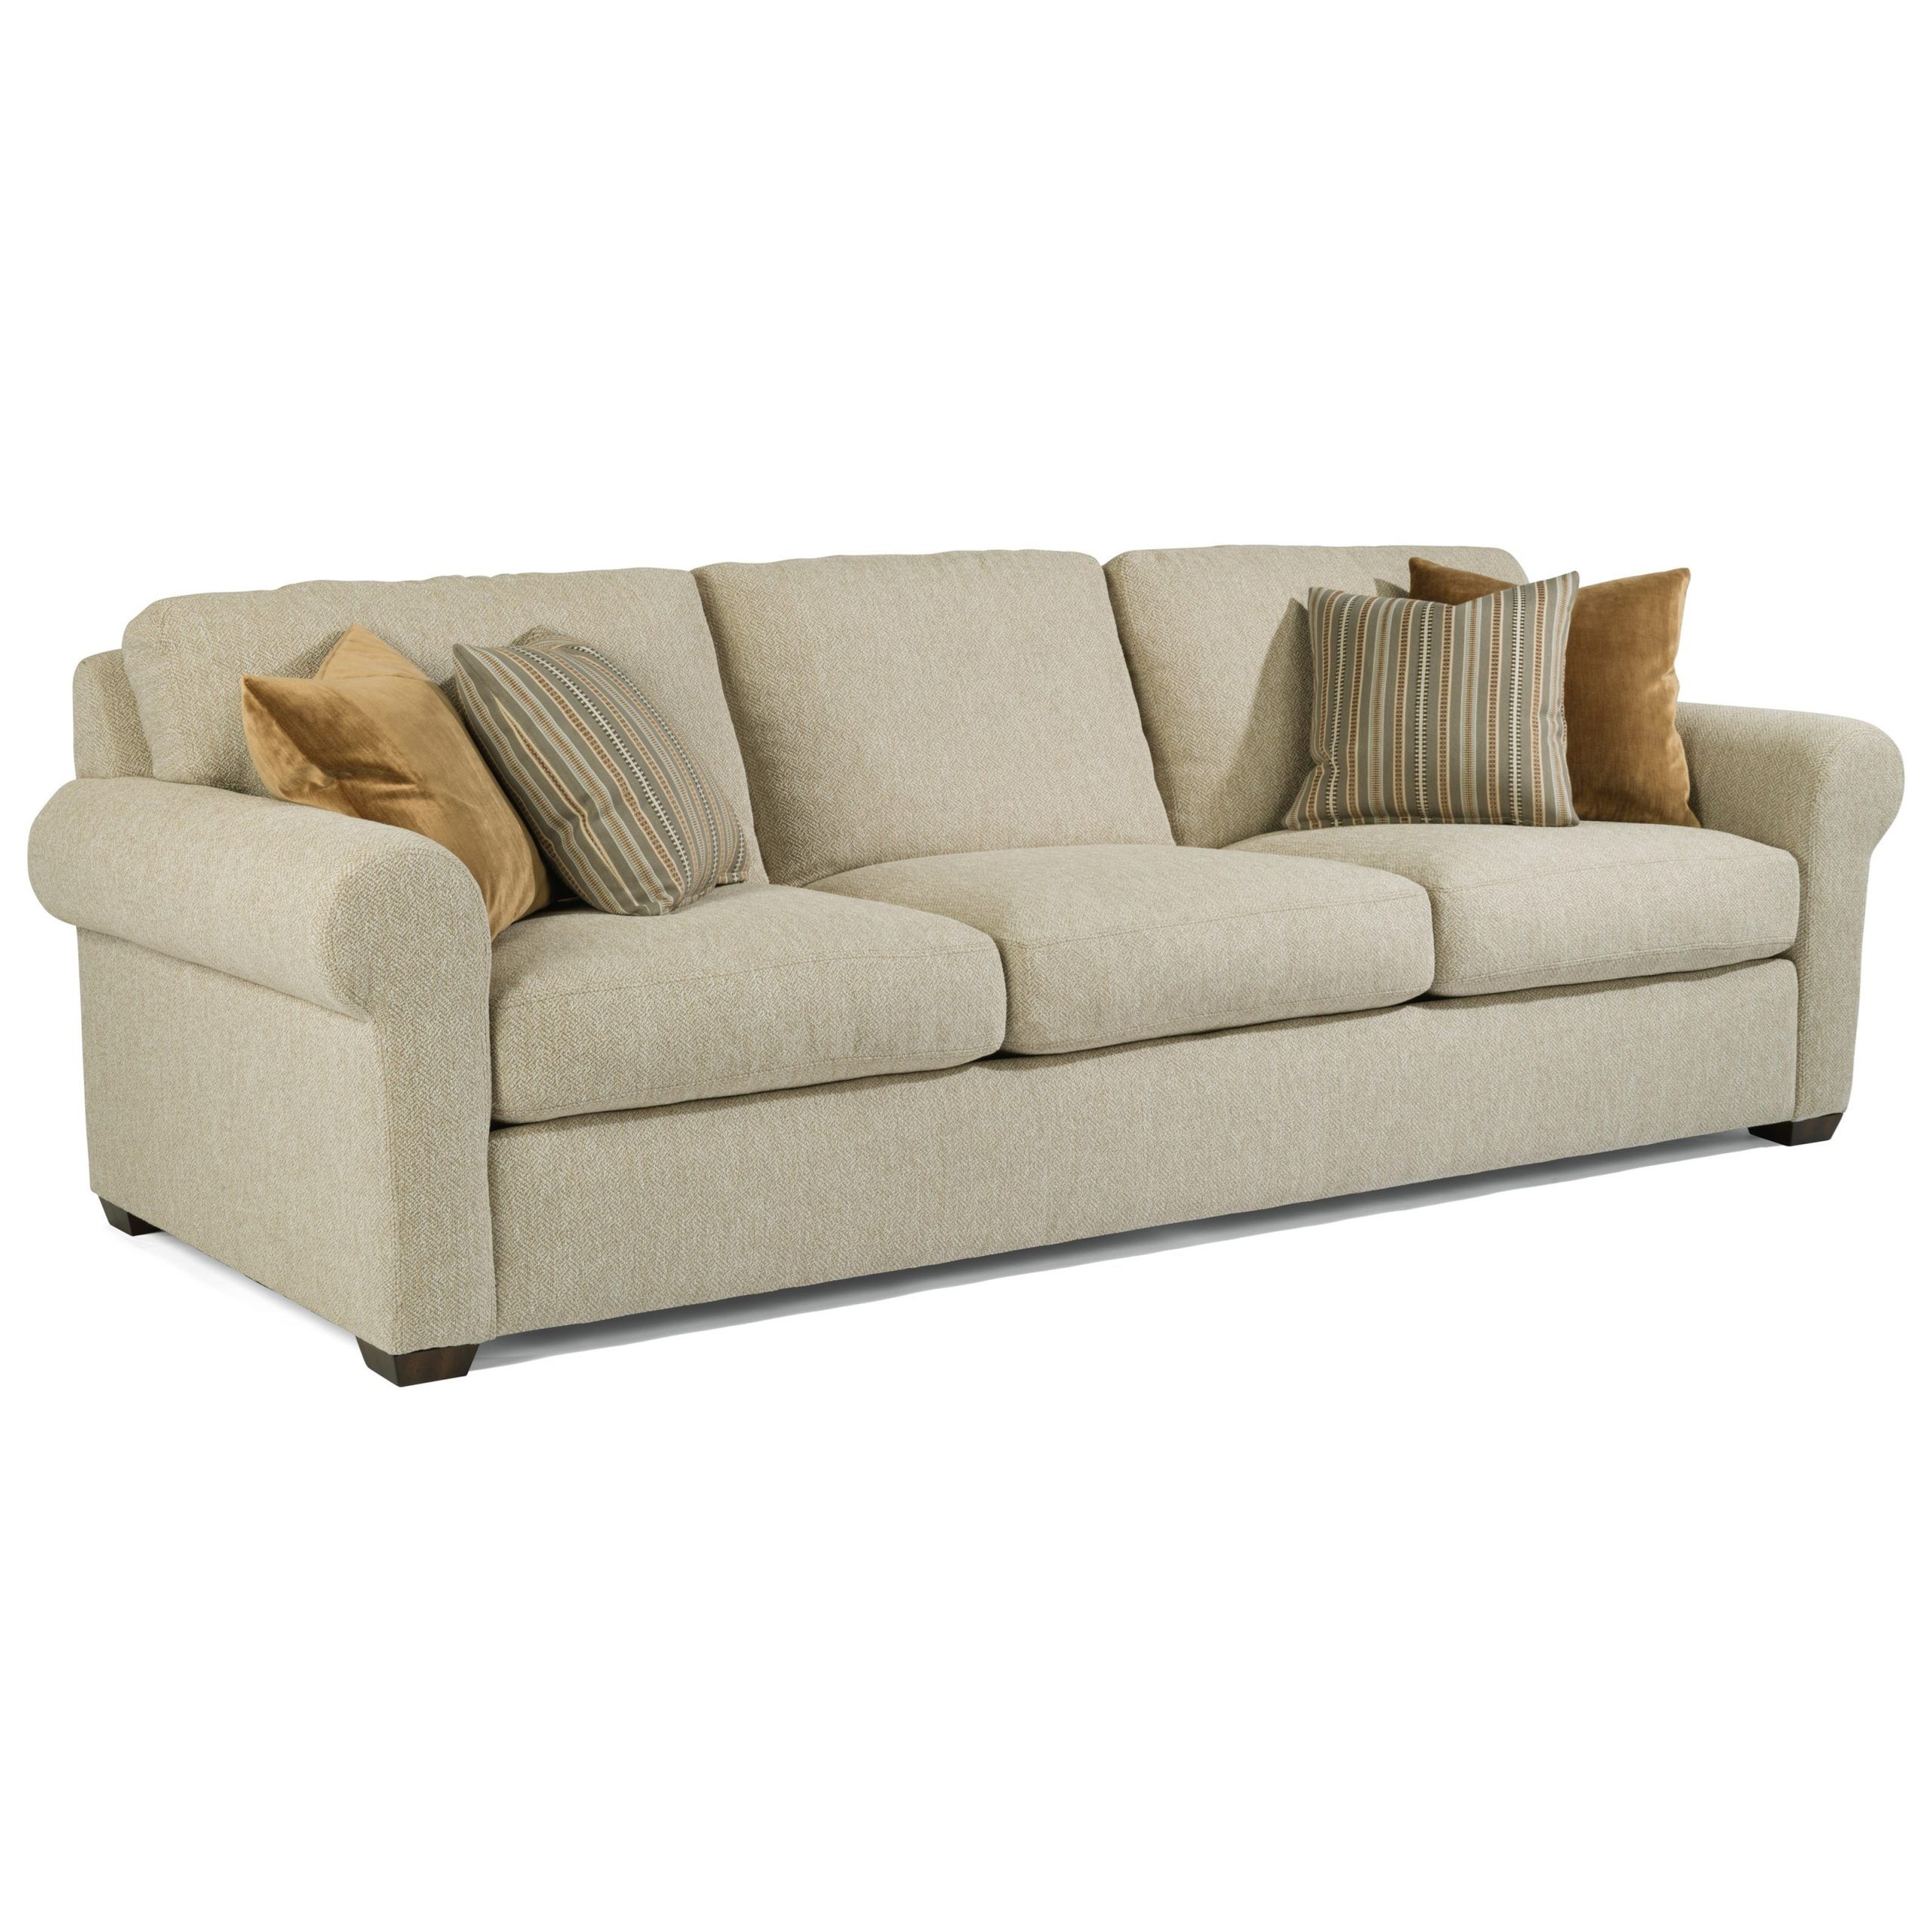 Flexsteel Randall Transitional 105" Three Cushion Sofa With Rolled Arms Inside Sofas With Pillowback Wood Bases (Gallery 6 of 20)